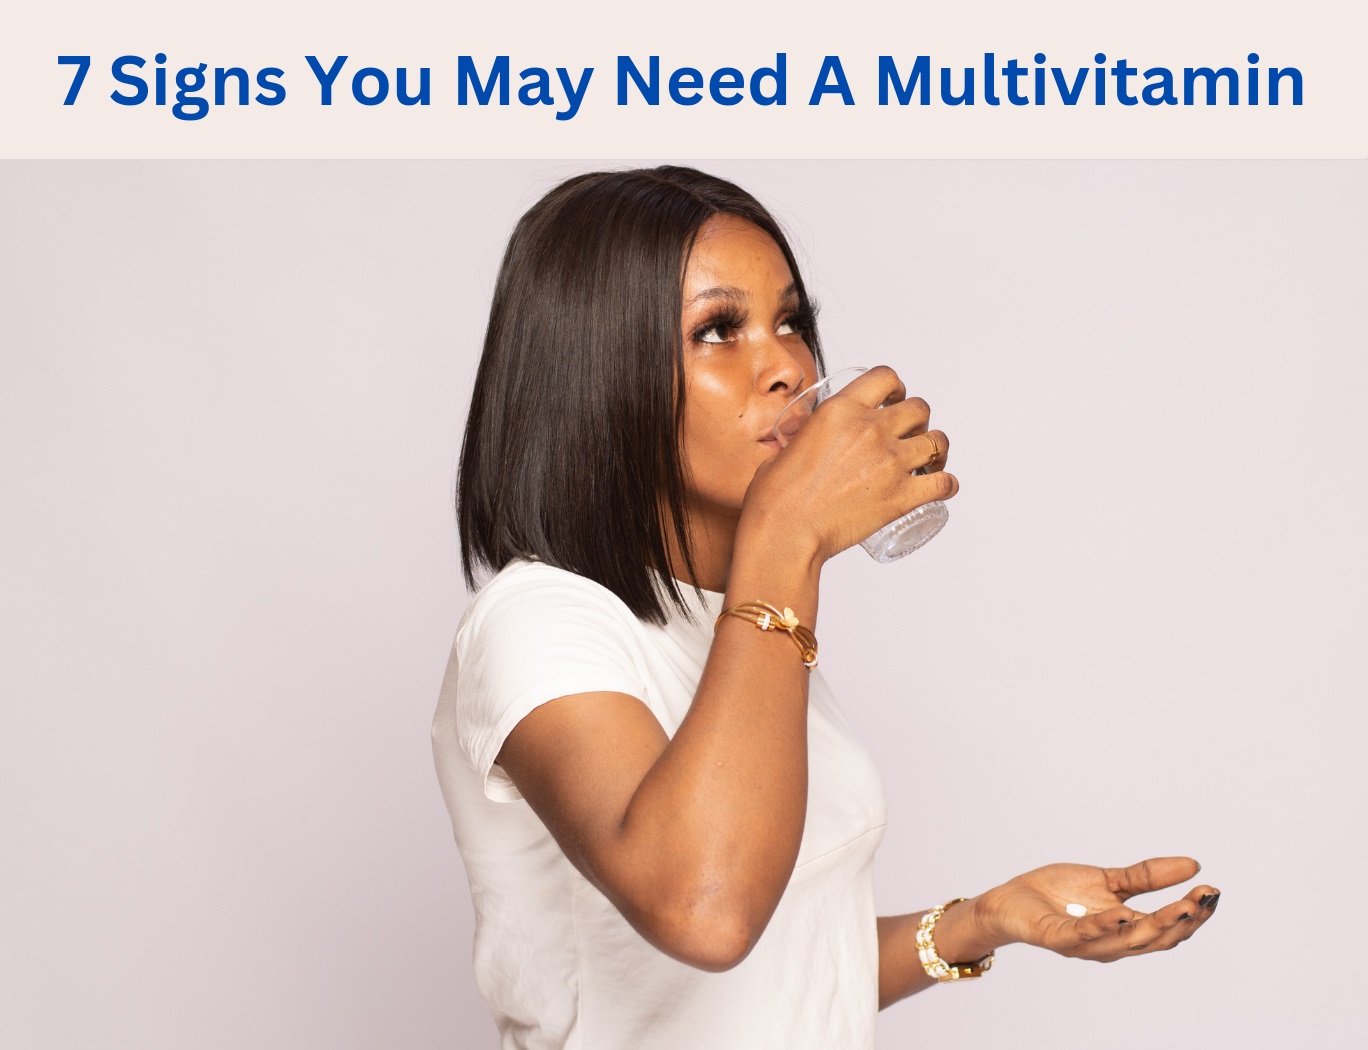 Signs you may need a multivitamin supplement